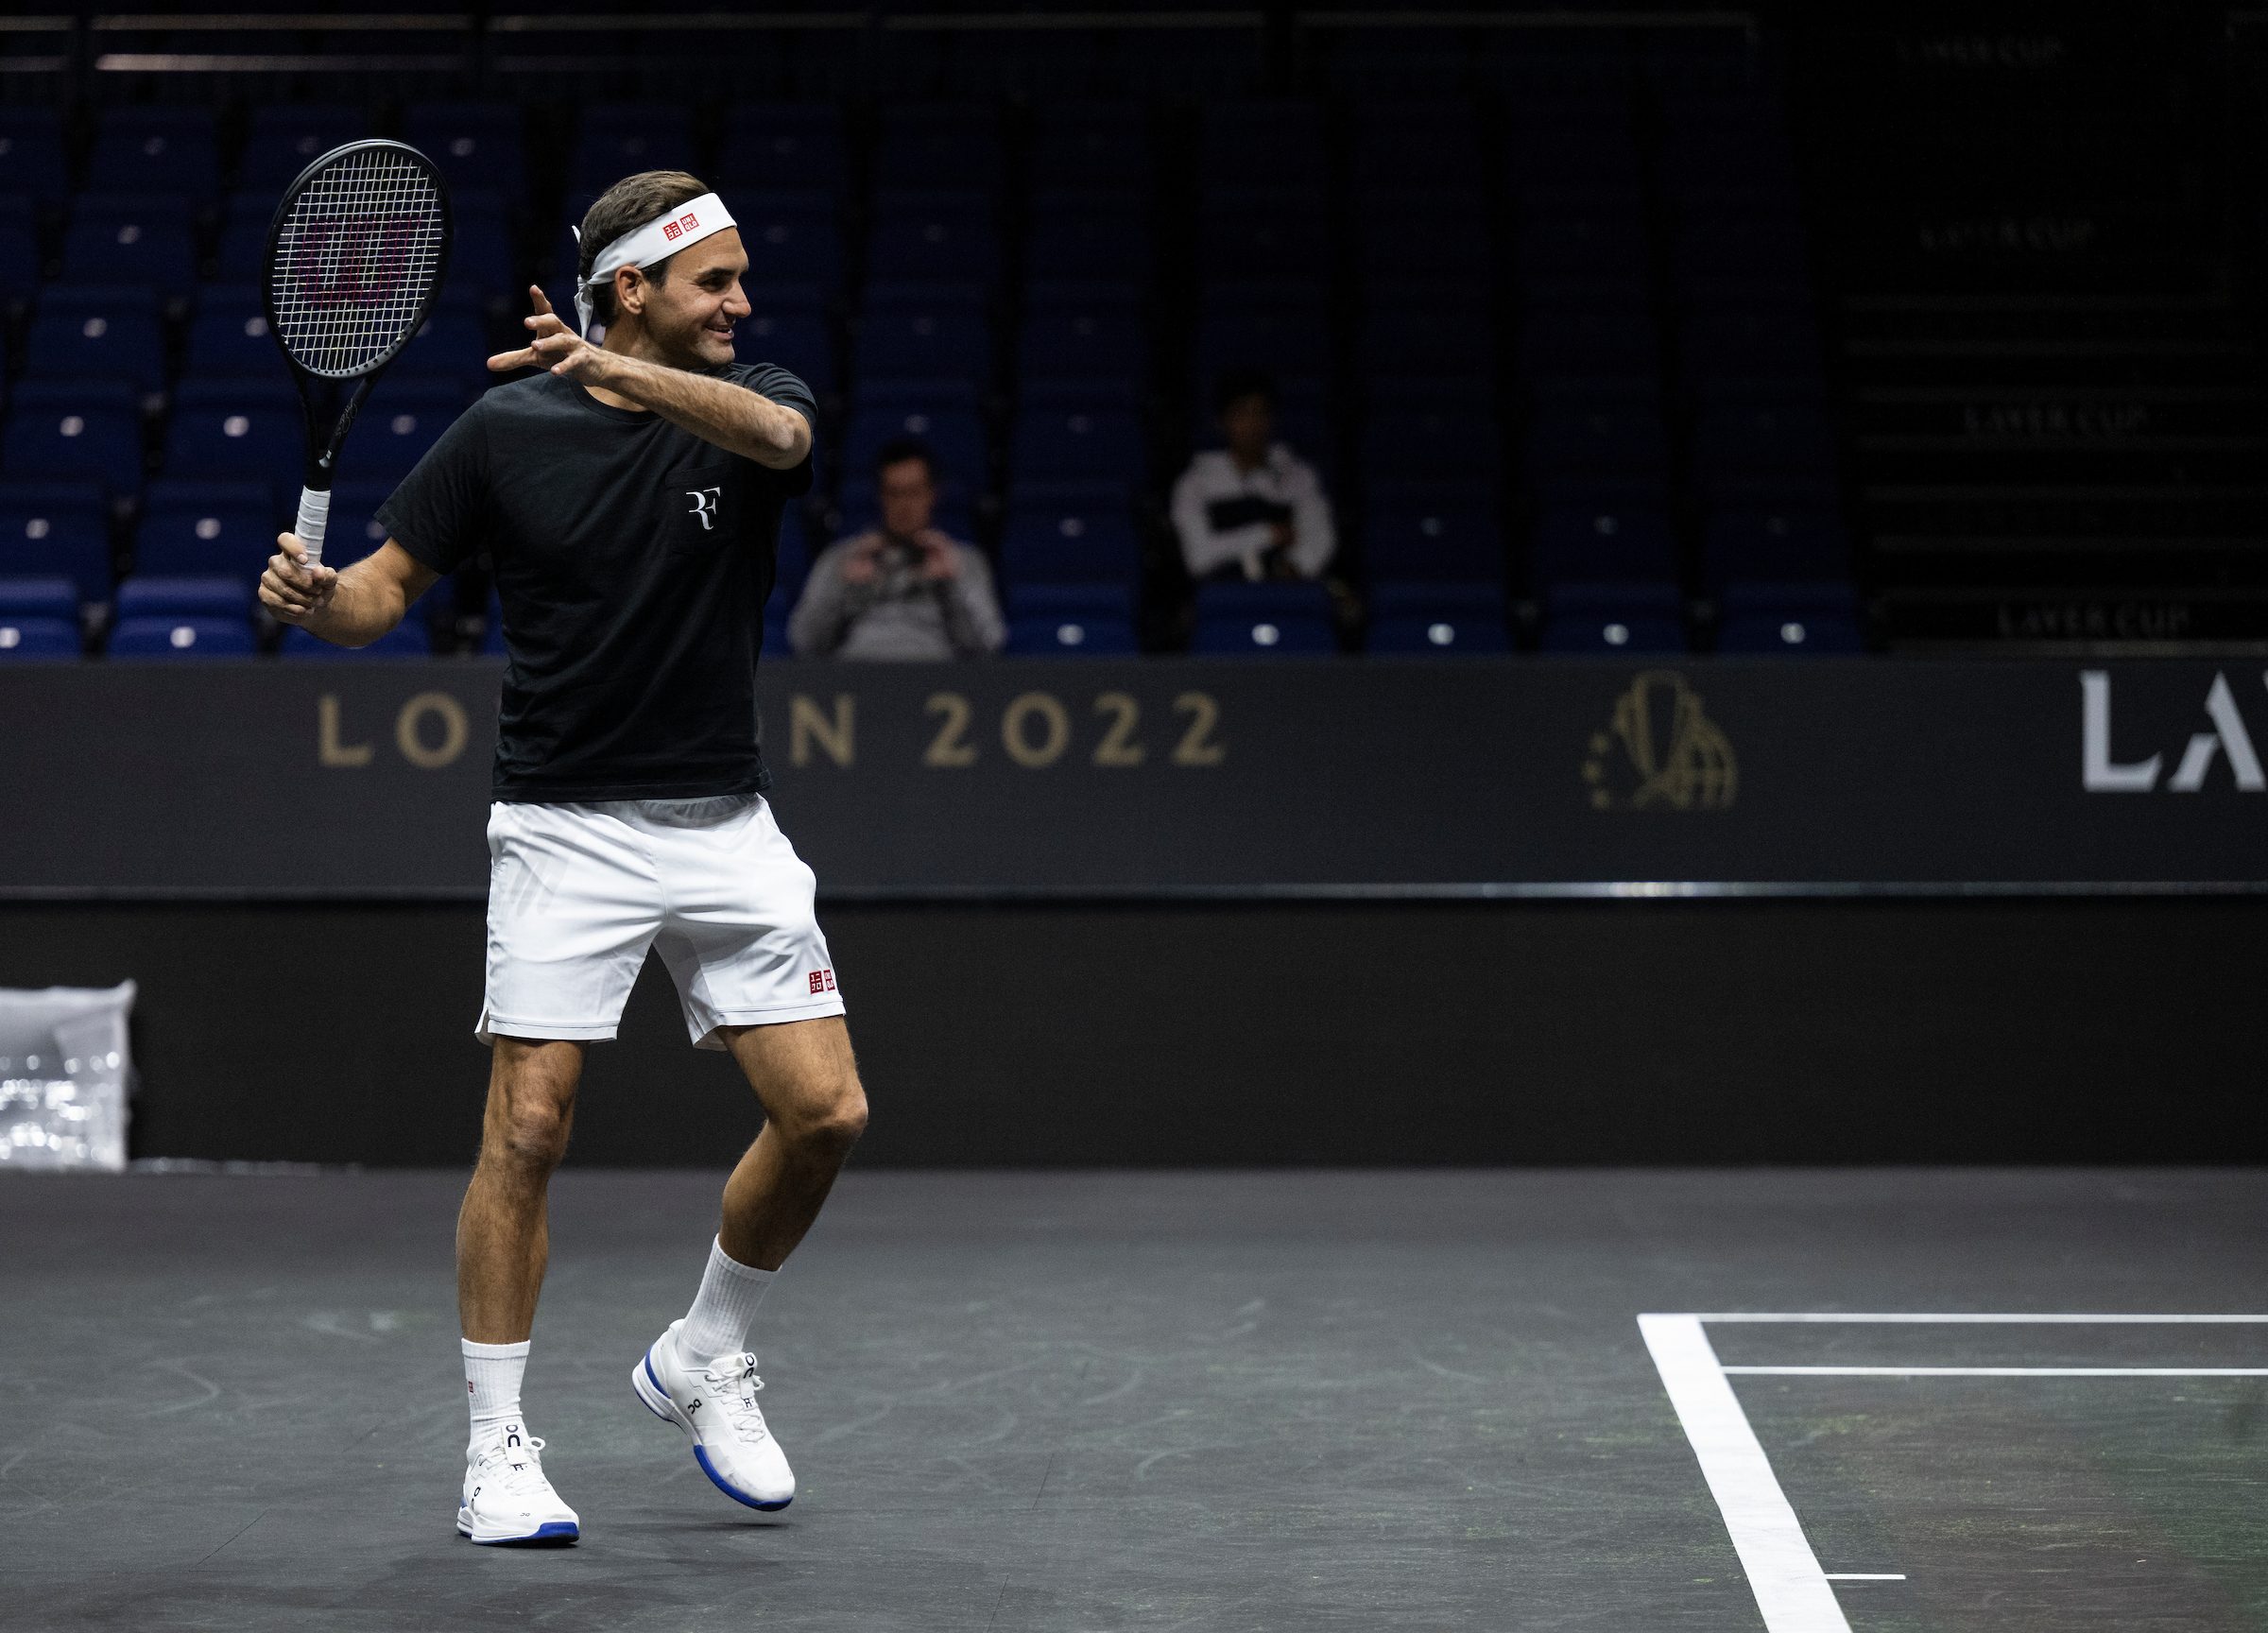 I won’t become a tennis ghost, says Federer, ahead of final bow